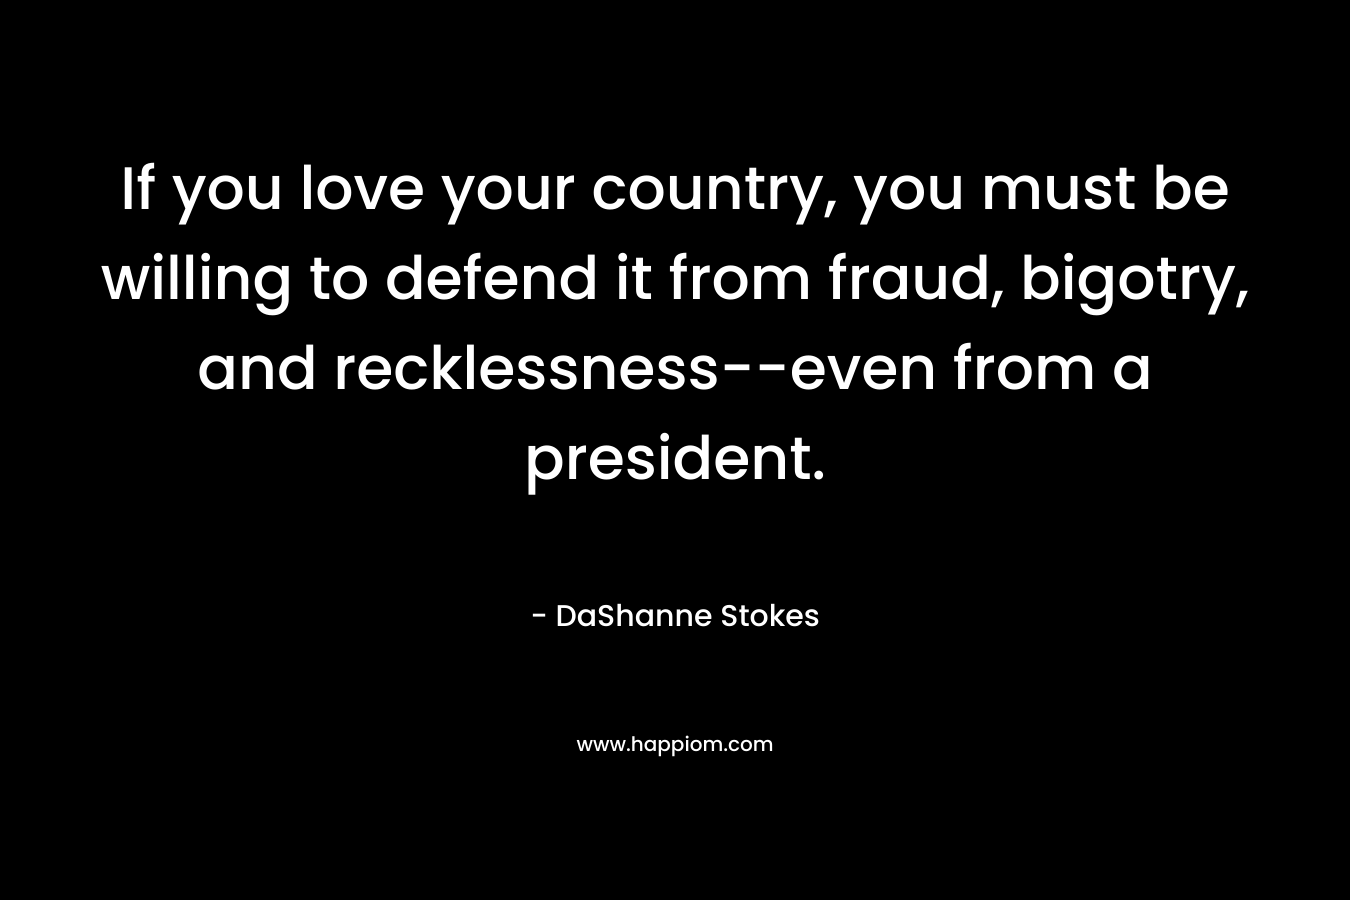 If you love your country, you must be willing to defend it from fraud, bigotry, and recklessness--even from a president.